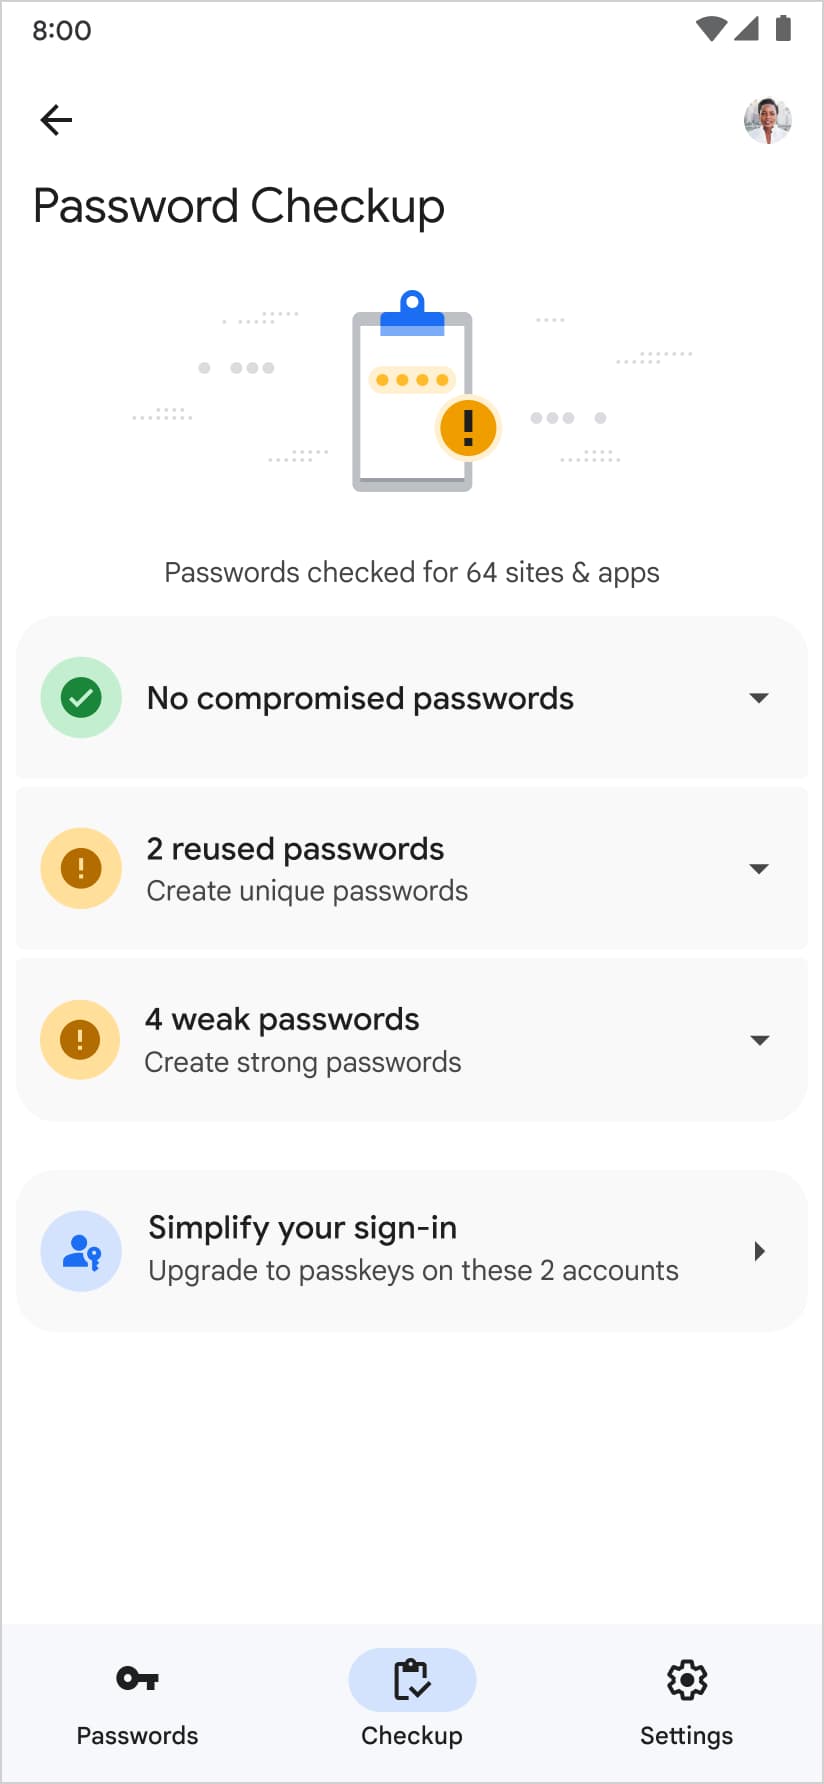 Google Password Manager also suggests creating a passkey on the password checkup page.